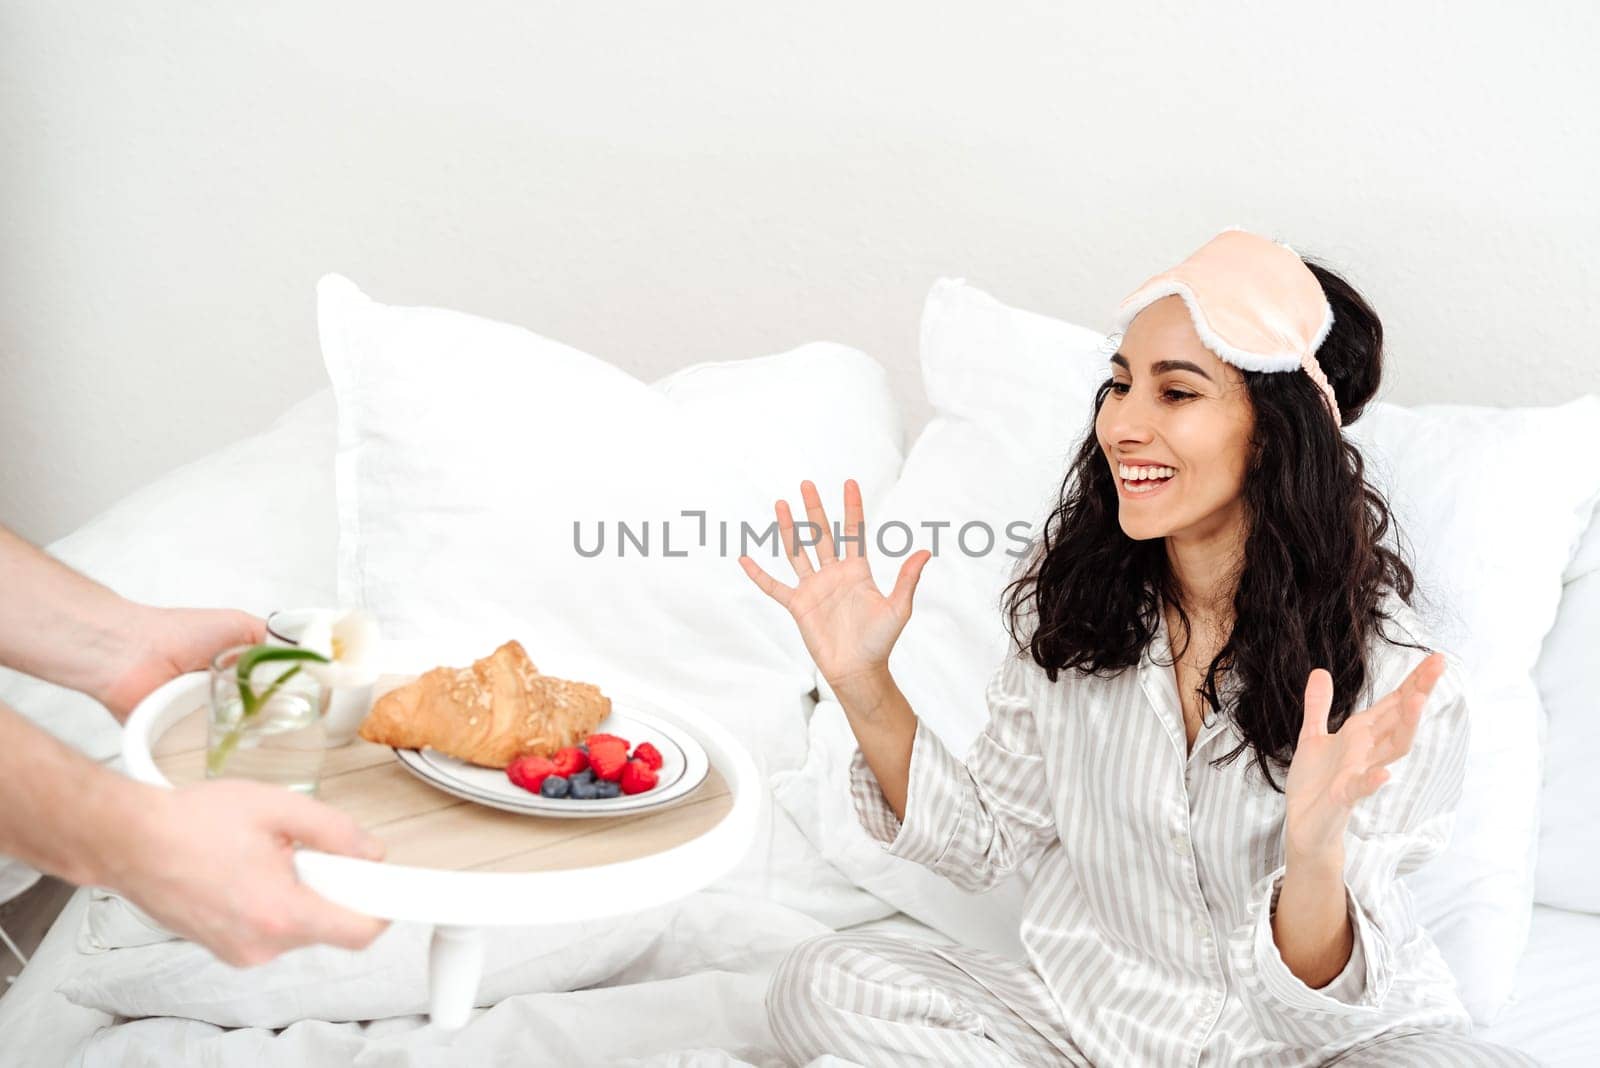 Beautiful woman of Eastern appearance rejoices in breakfast in bed. Hands holding a tray with croissant, berries and a flower. Girl in pajamas has just woken up and brightly rejoices at the surprise.